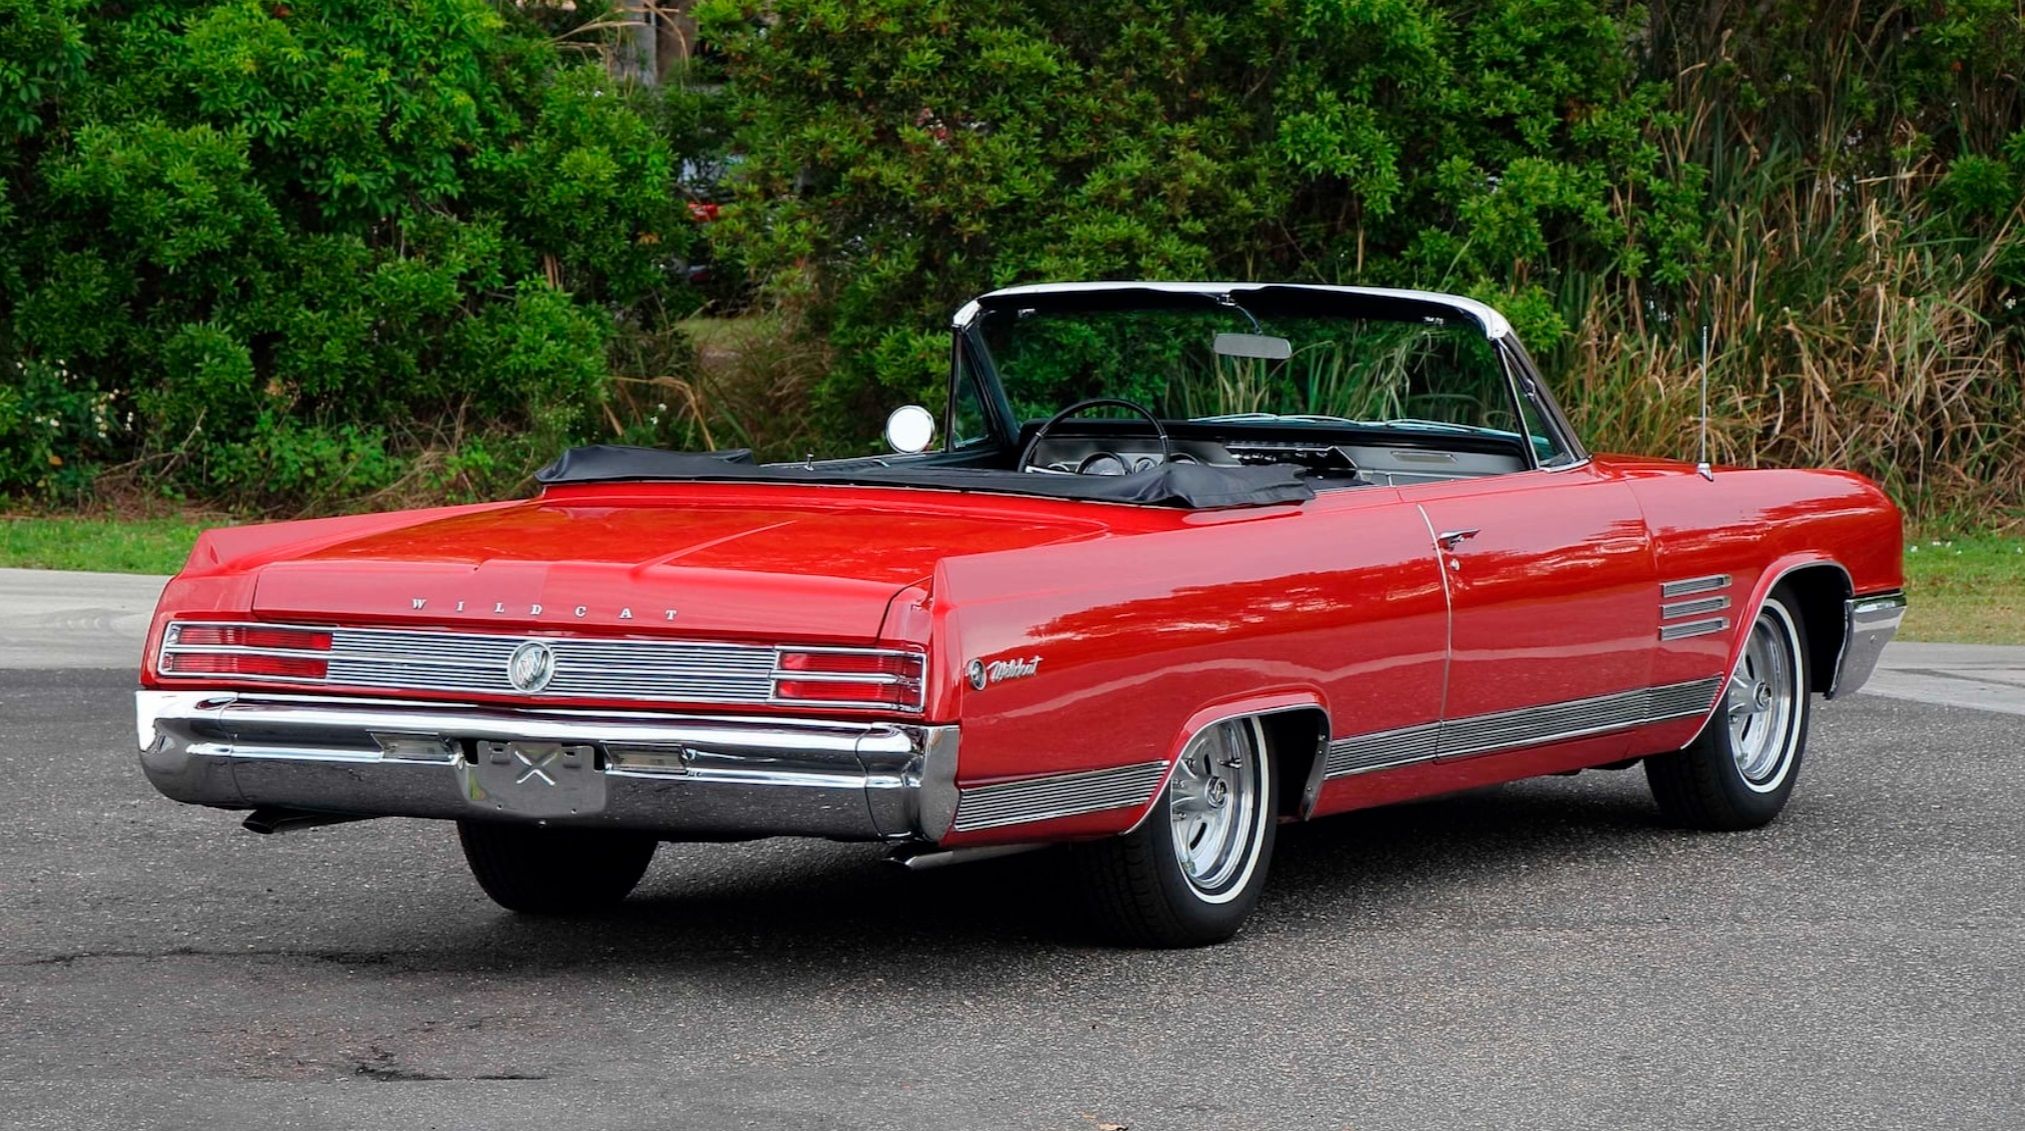 The 1964 Buick Wildcat Convertible rear view.